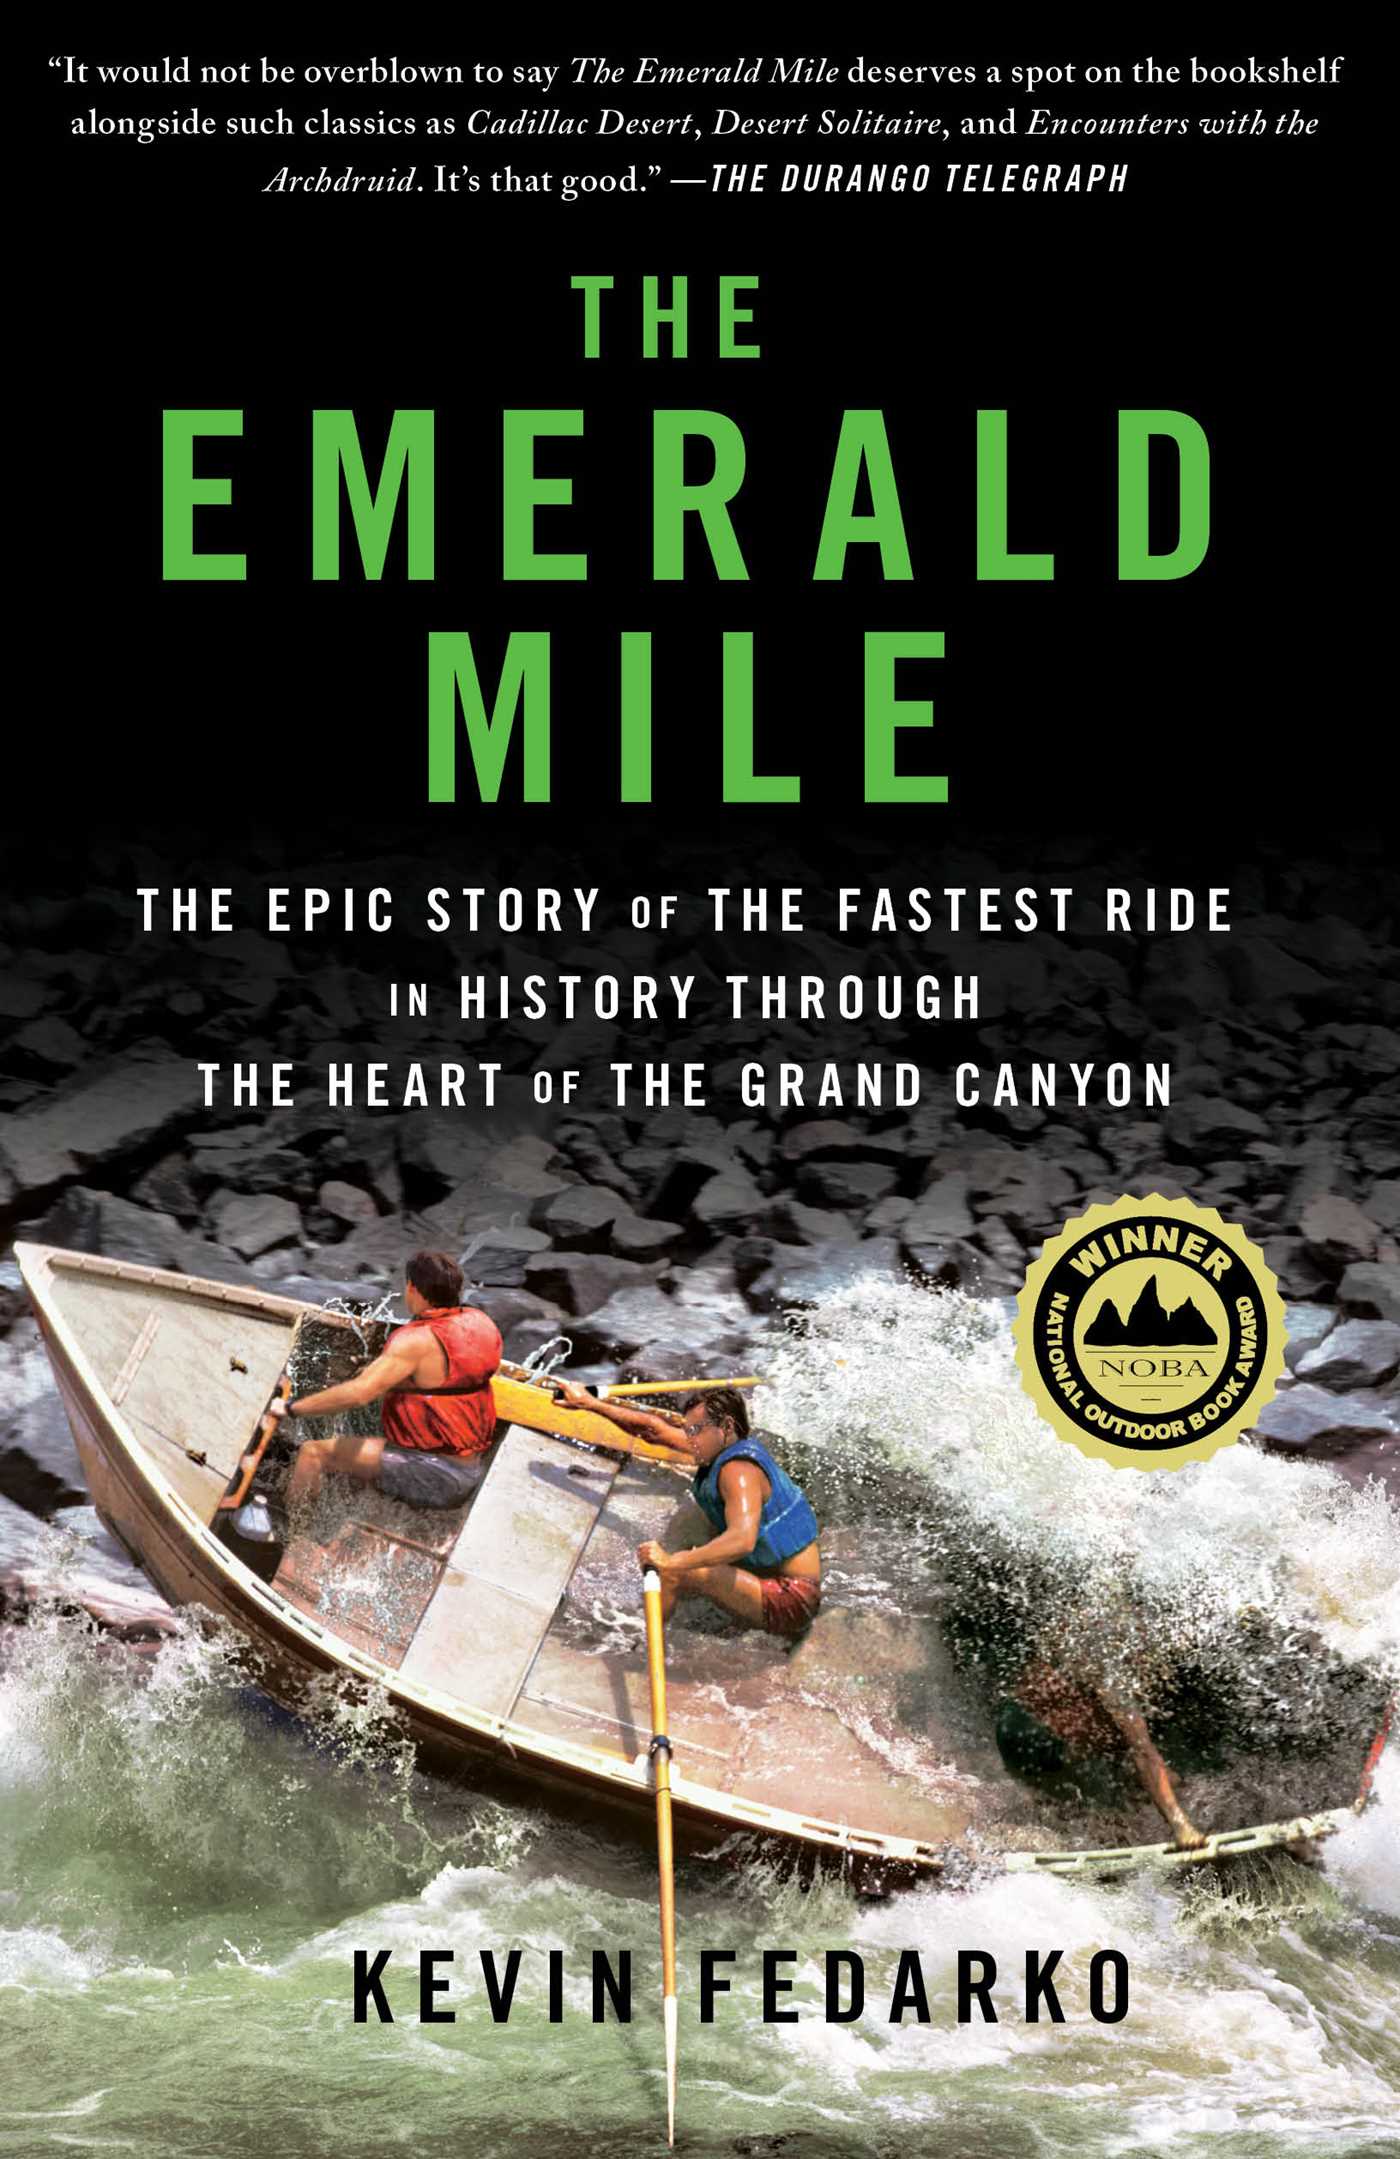 MntnReview: The Story Behind The Emerald Mile